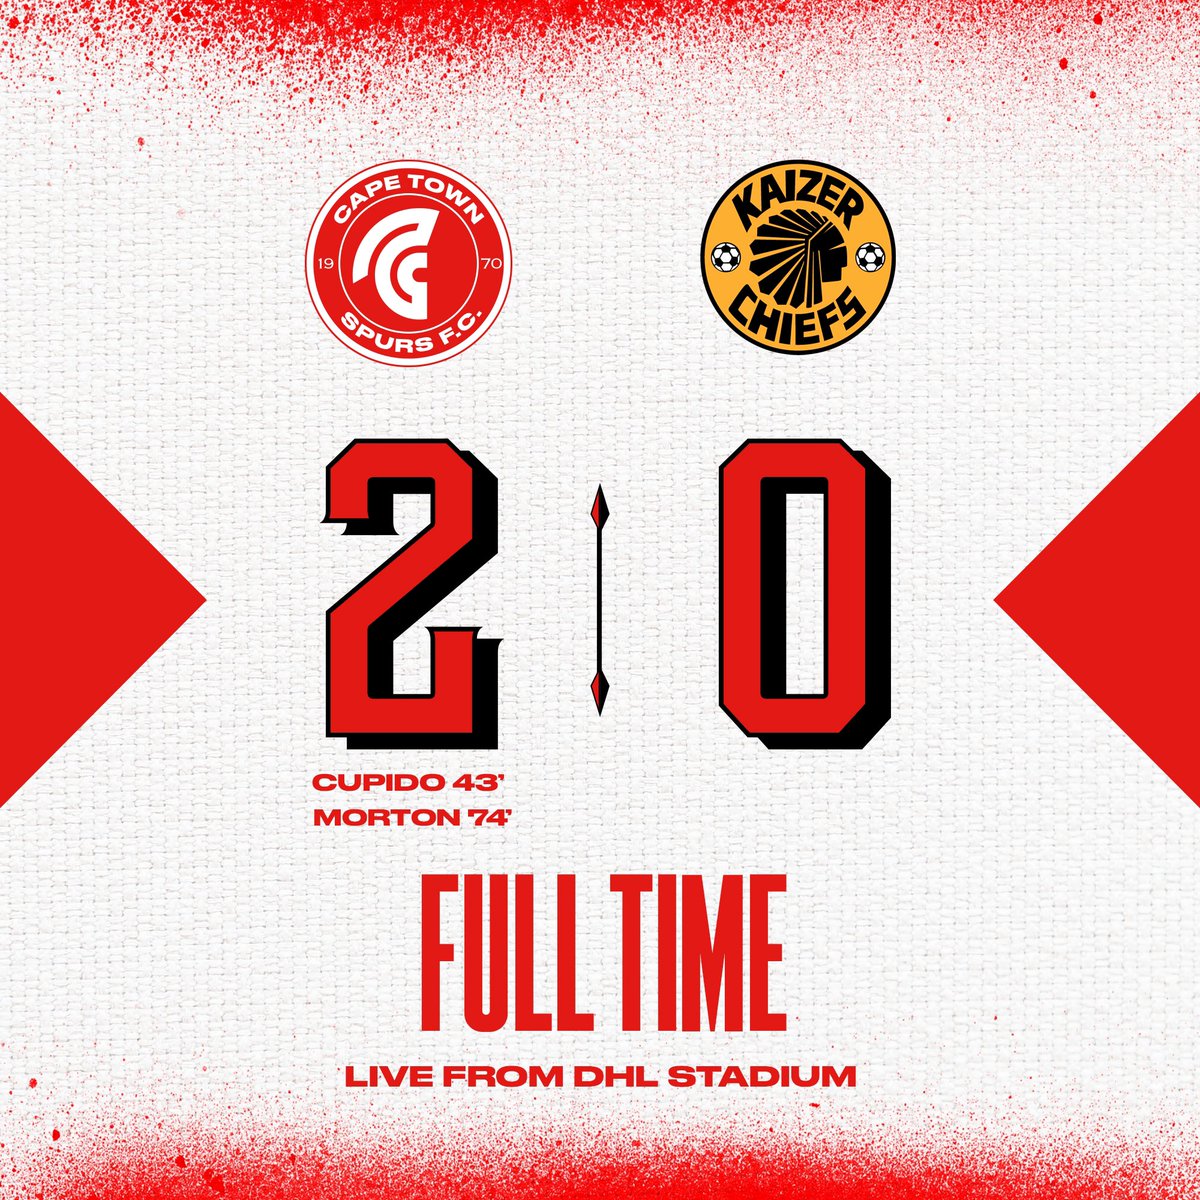 David conquers Goliath on the last day! 🛡️💪🏼 Thank you to all our fans for your support through a tough season! WE WILL RETURN STRONGER 💪🏼 #CAPETOWNSPURS #URBANWARRIORS #PSL #DSTVPREMIERSHIP #OURYOUTHOURFUTURE #CAPETOWN #SOUTHAFRICA